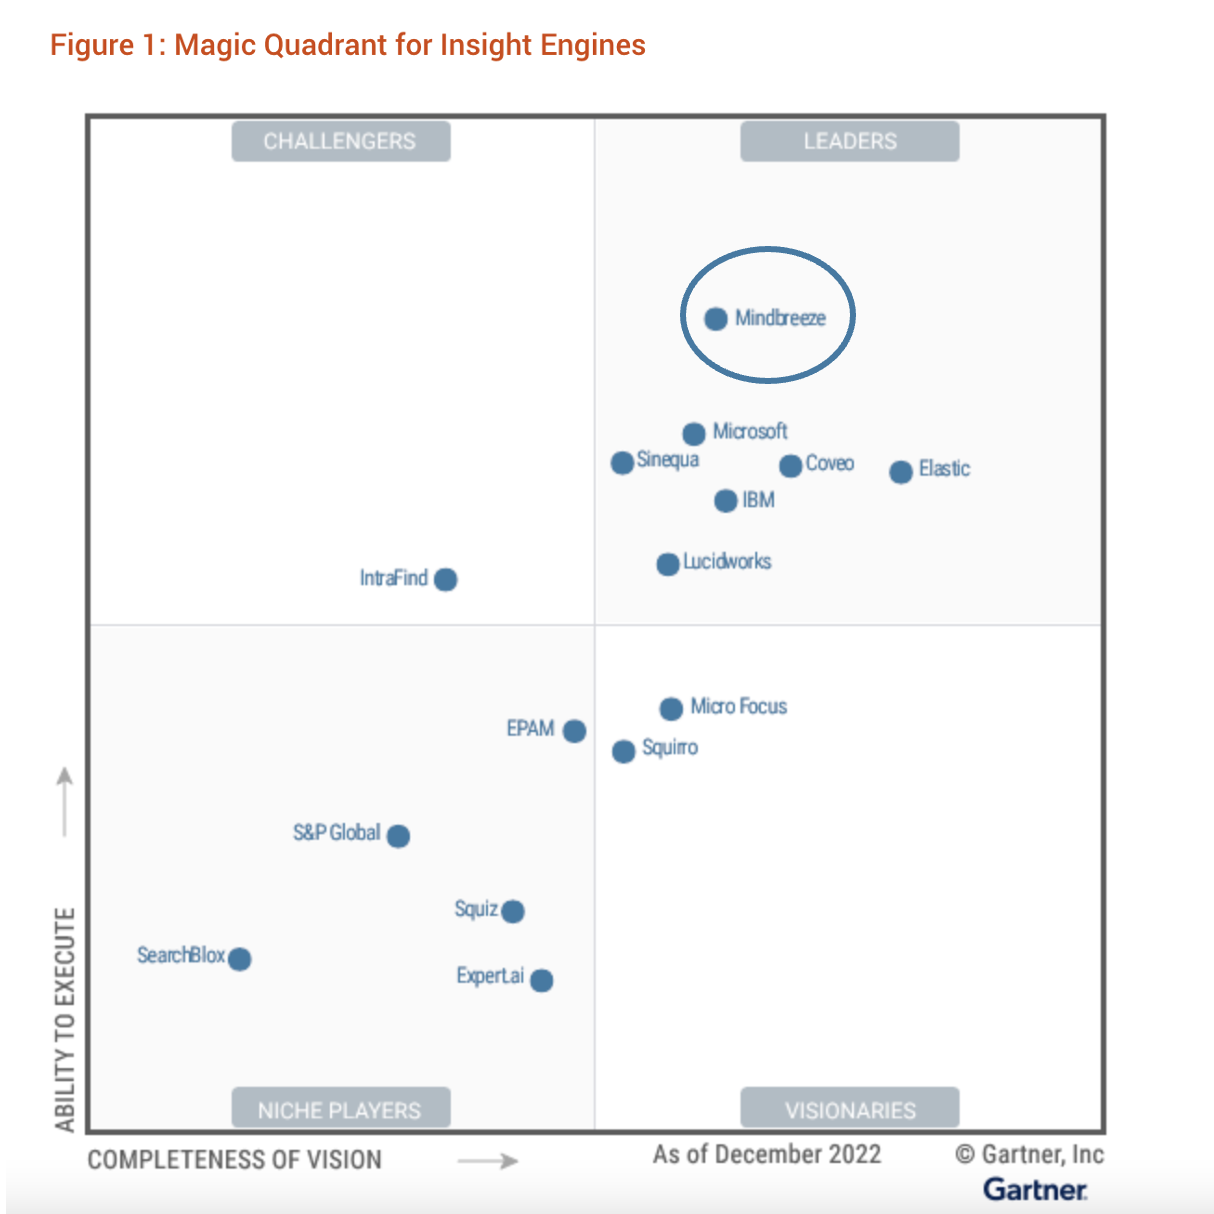 Mindbreeze is a Leader in Insight Engines and Enterprise Search on this 2021 chart by Gartner Magic Quadrant